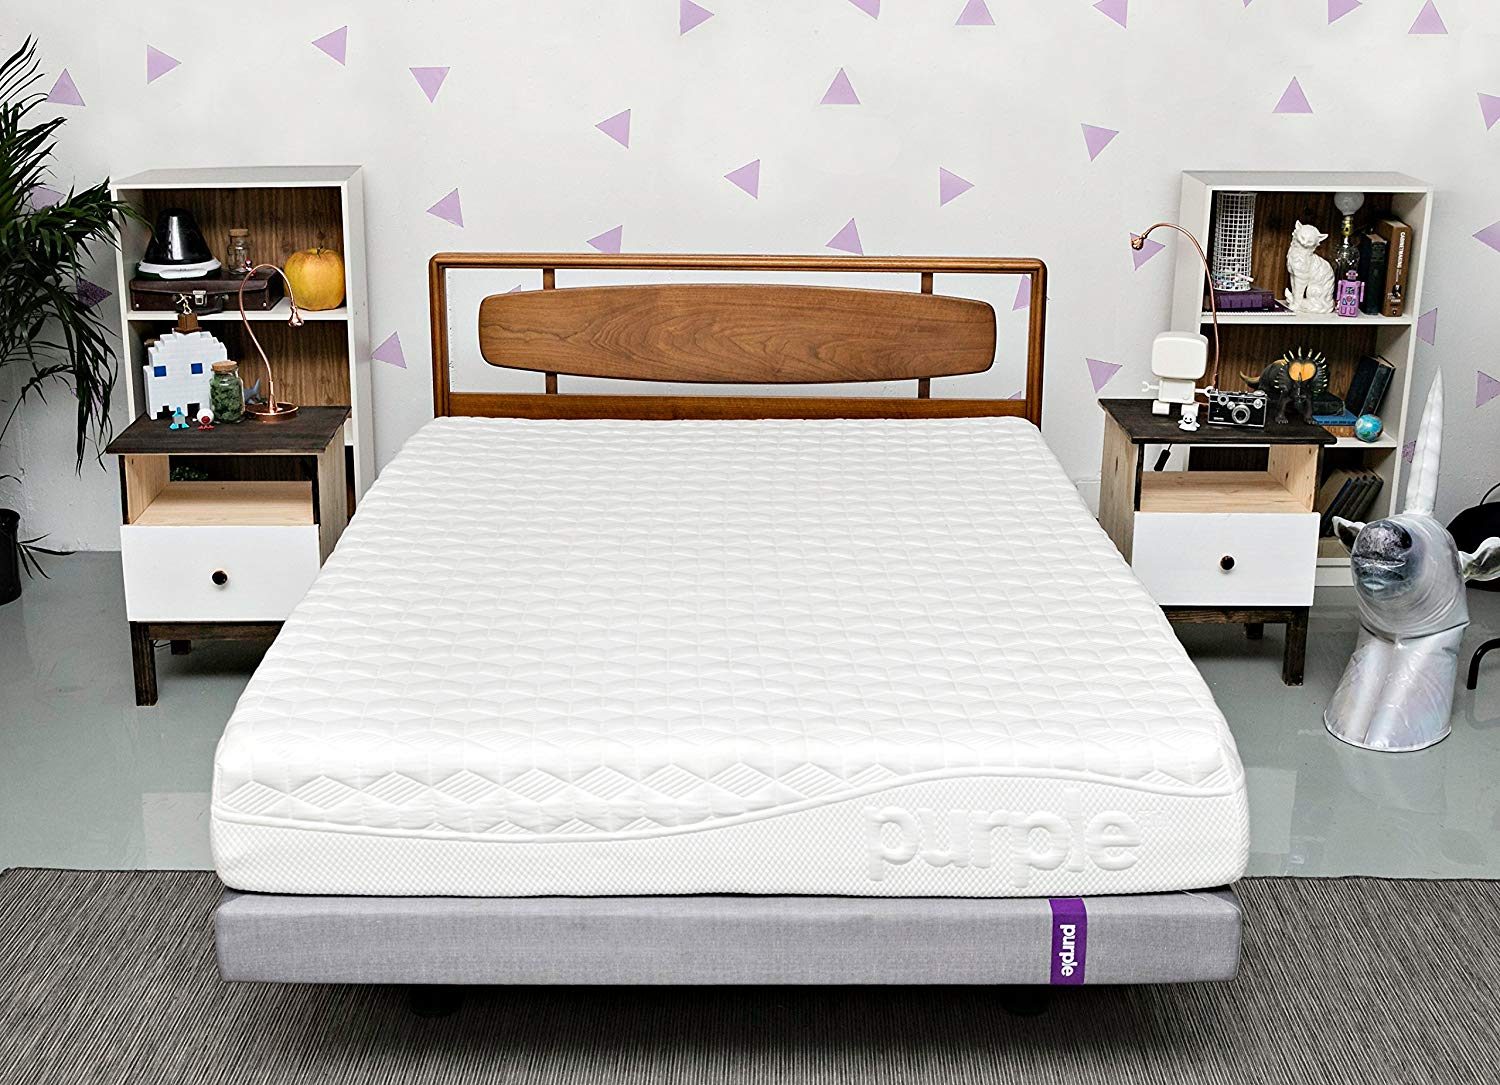 are purple mattresses and pillow worth it